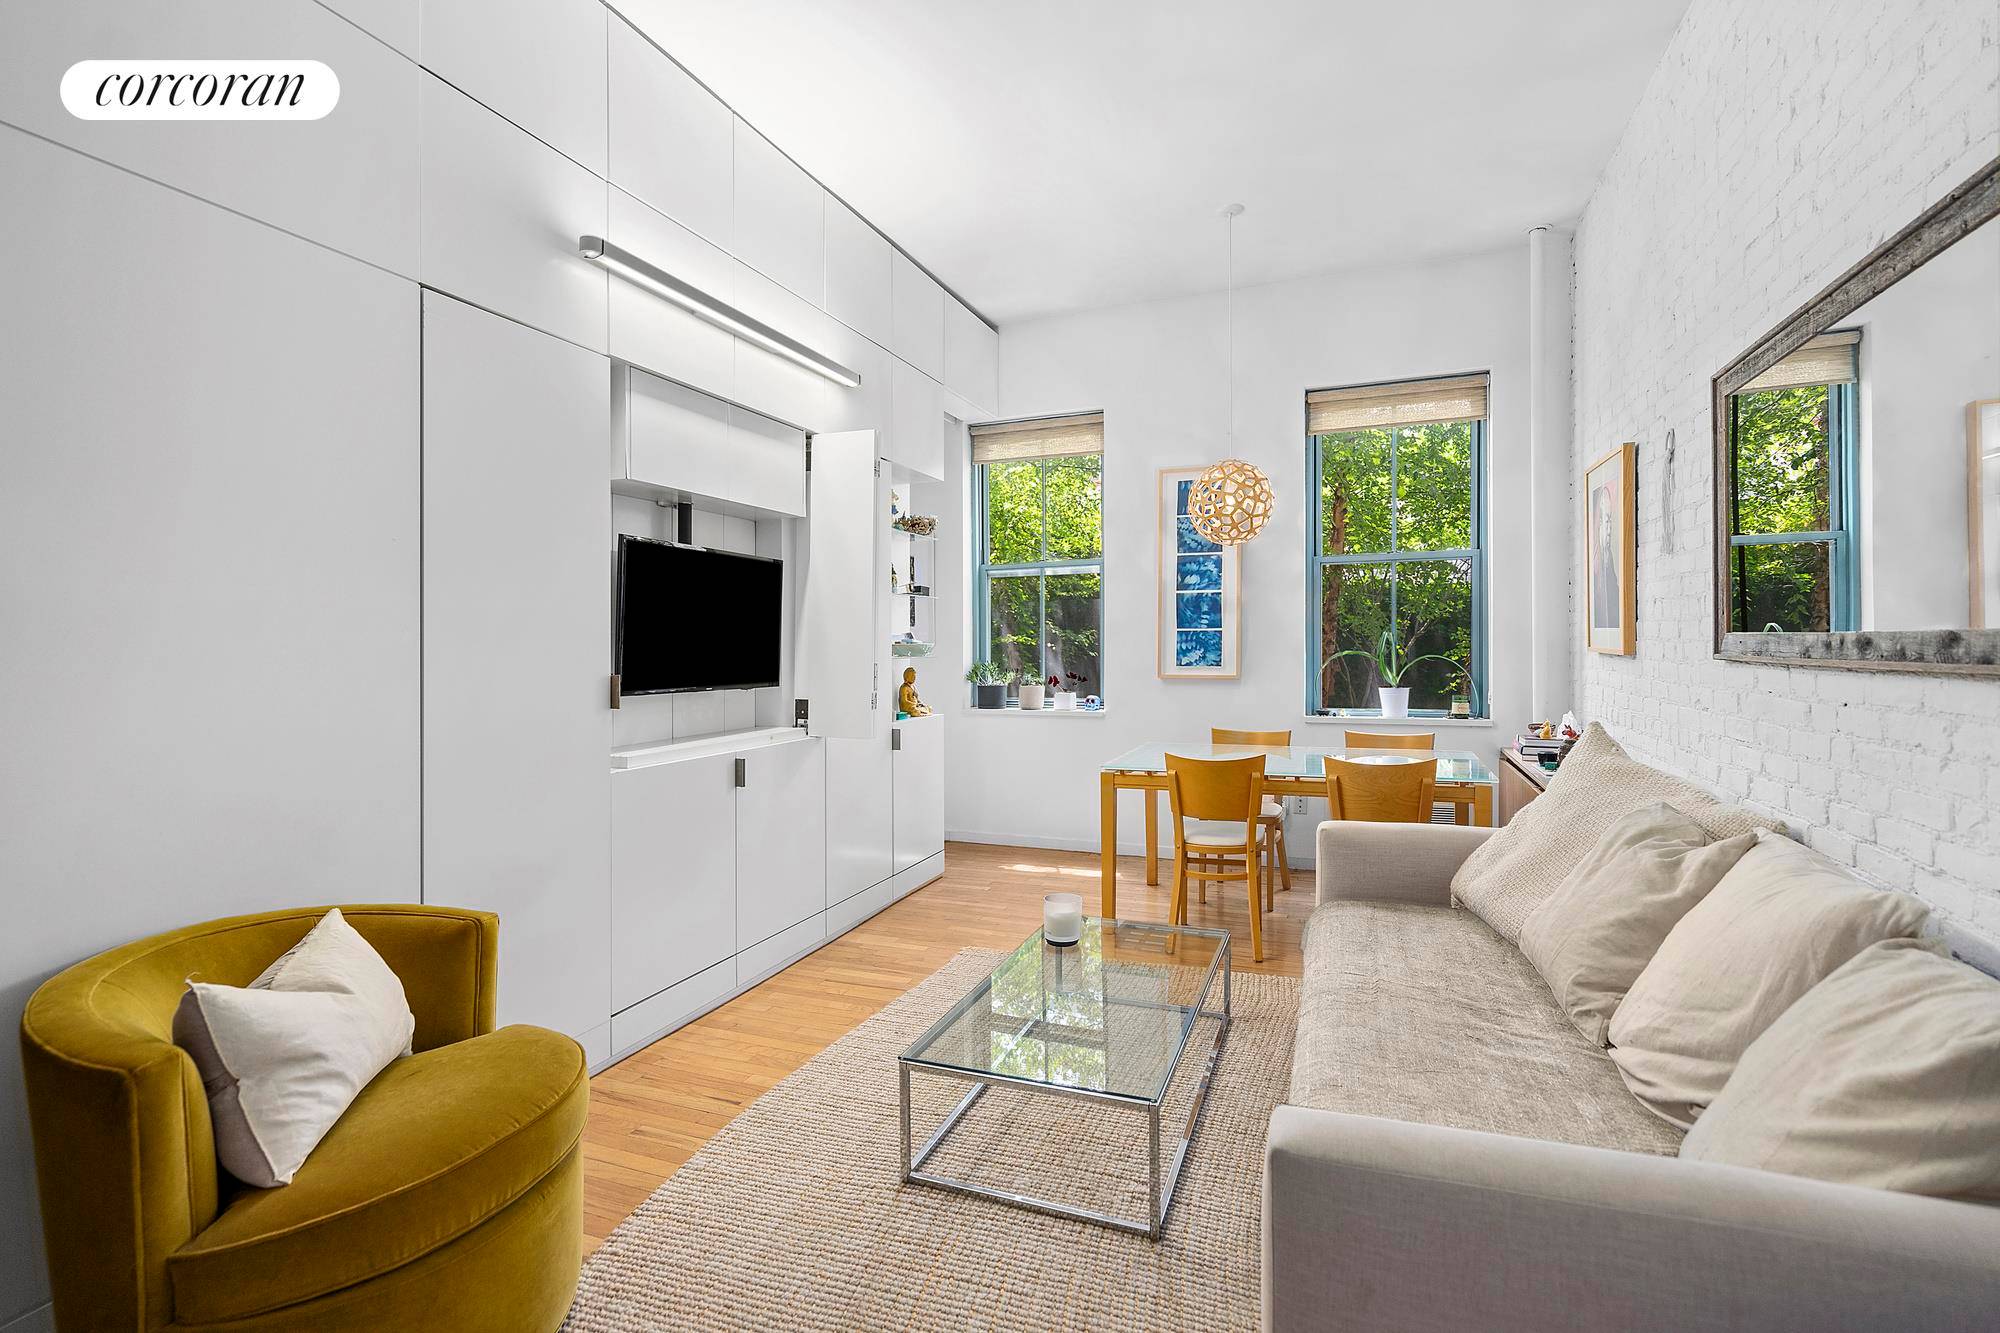 256 West 21st Street, Residence 1B is beautifully designed by Italian architect, Luca Andrisani.